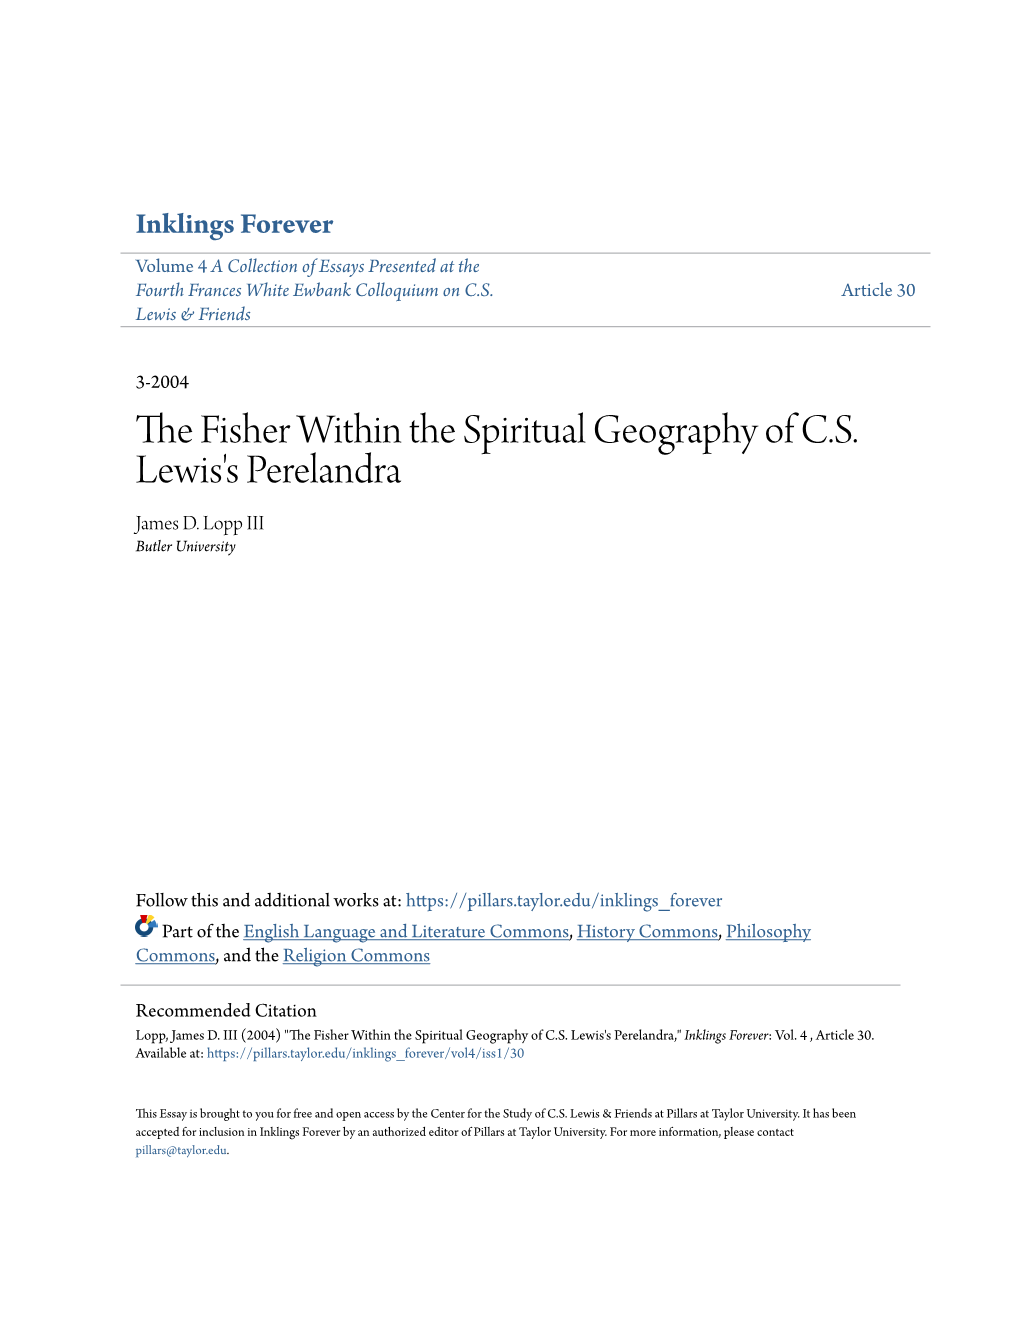 The Fisher Within the Spiritual Geography of C.S. Lewis's Perelandra